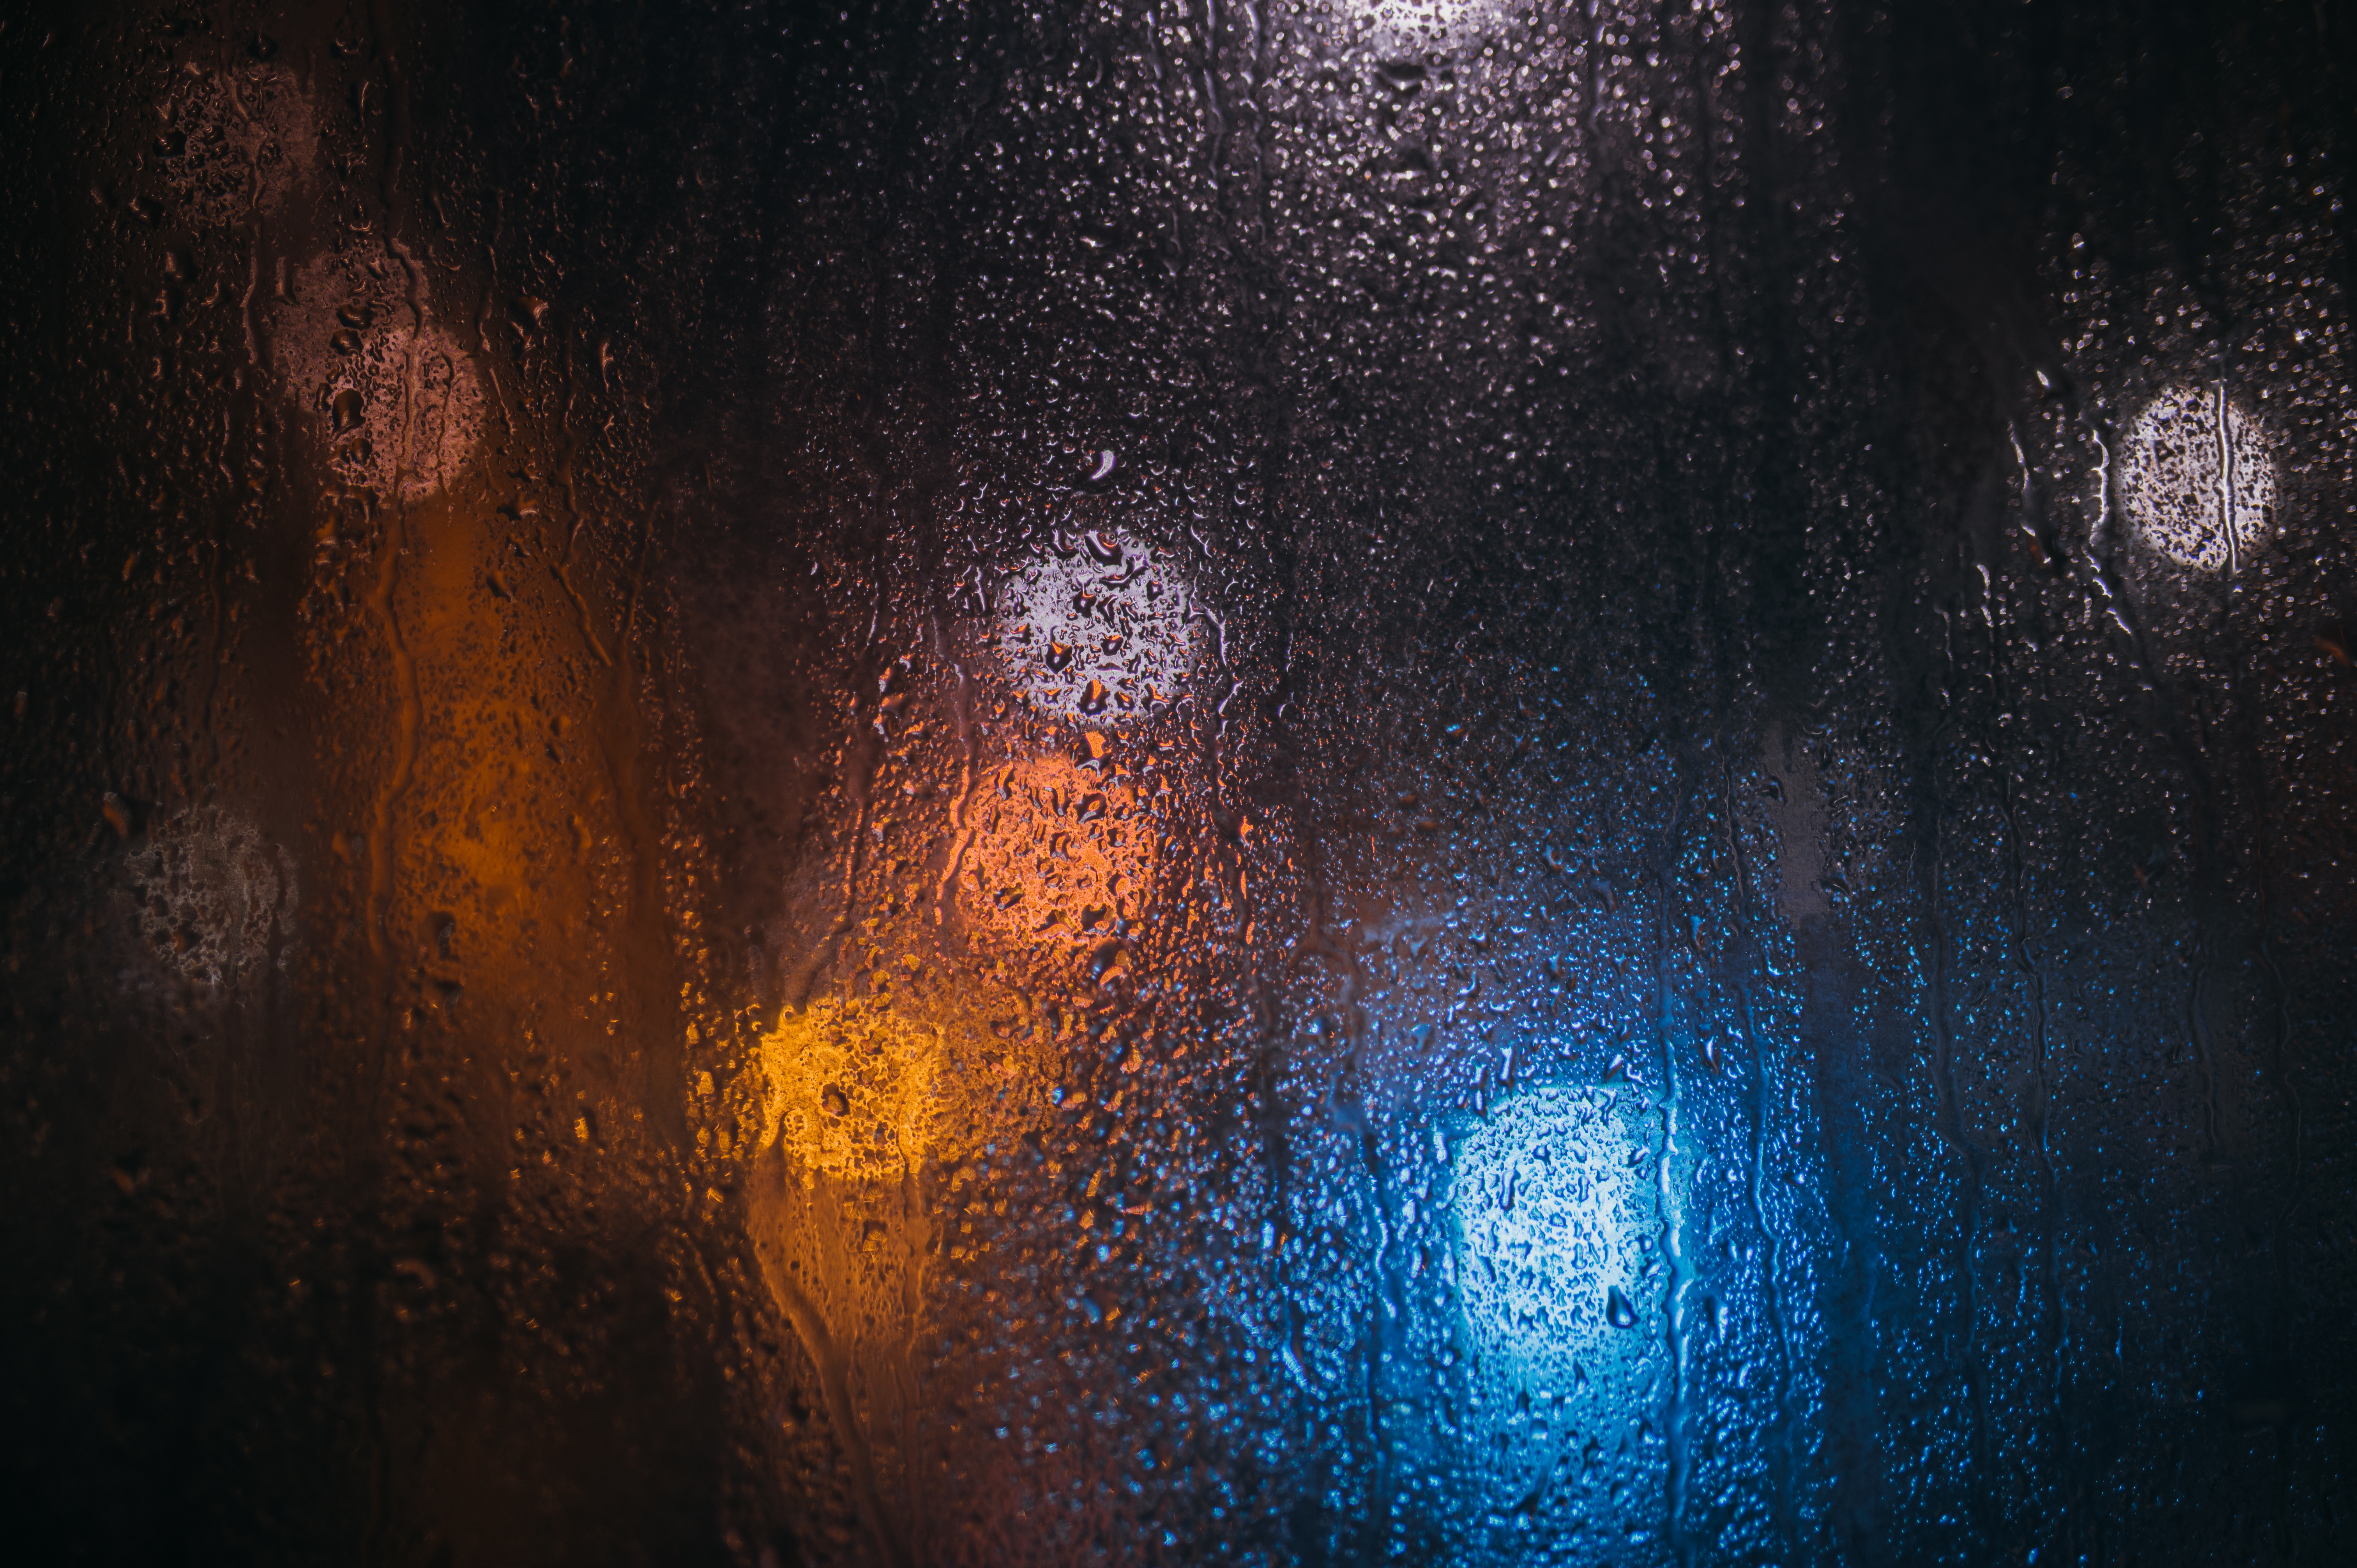 54609 download wallpaper rain, drops, lights, macro, blur, glass screensavers and pictures for free